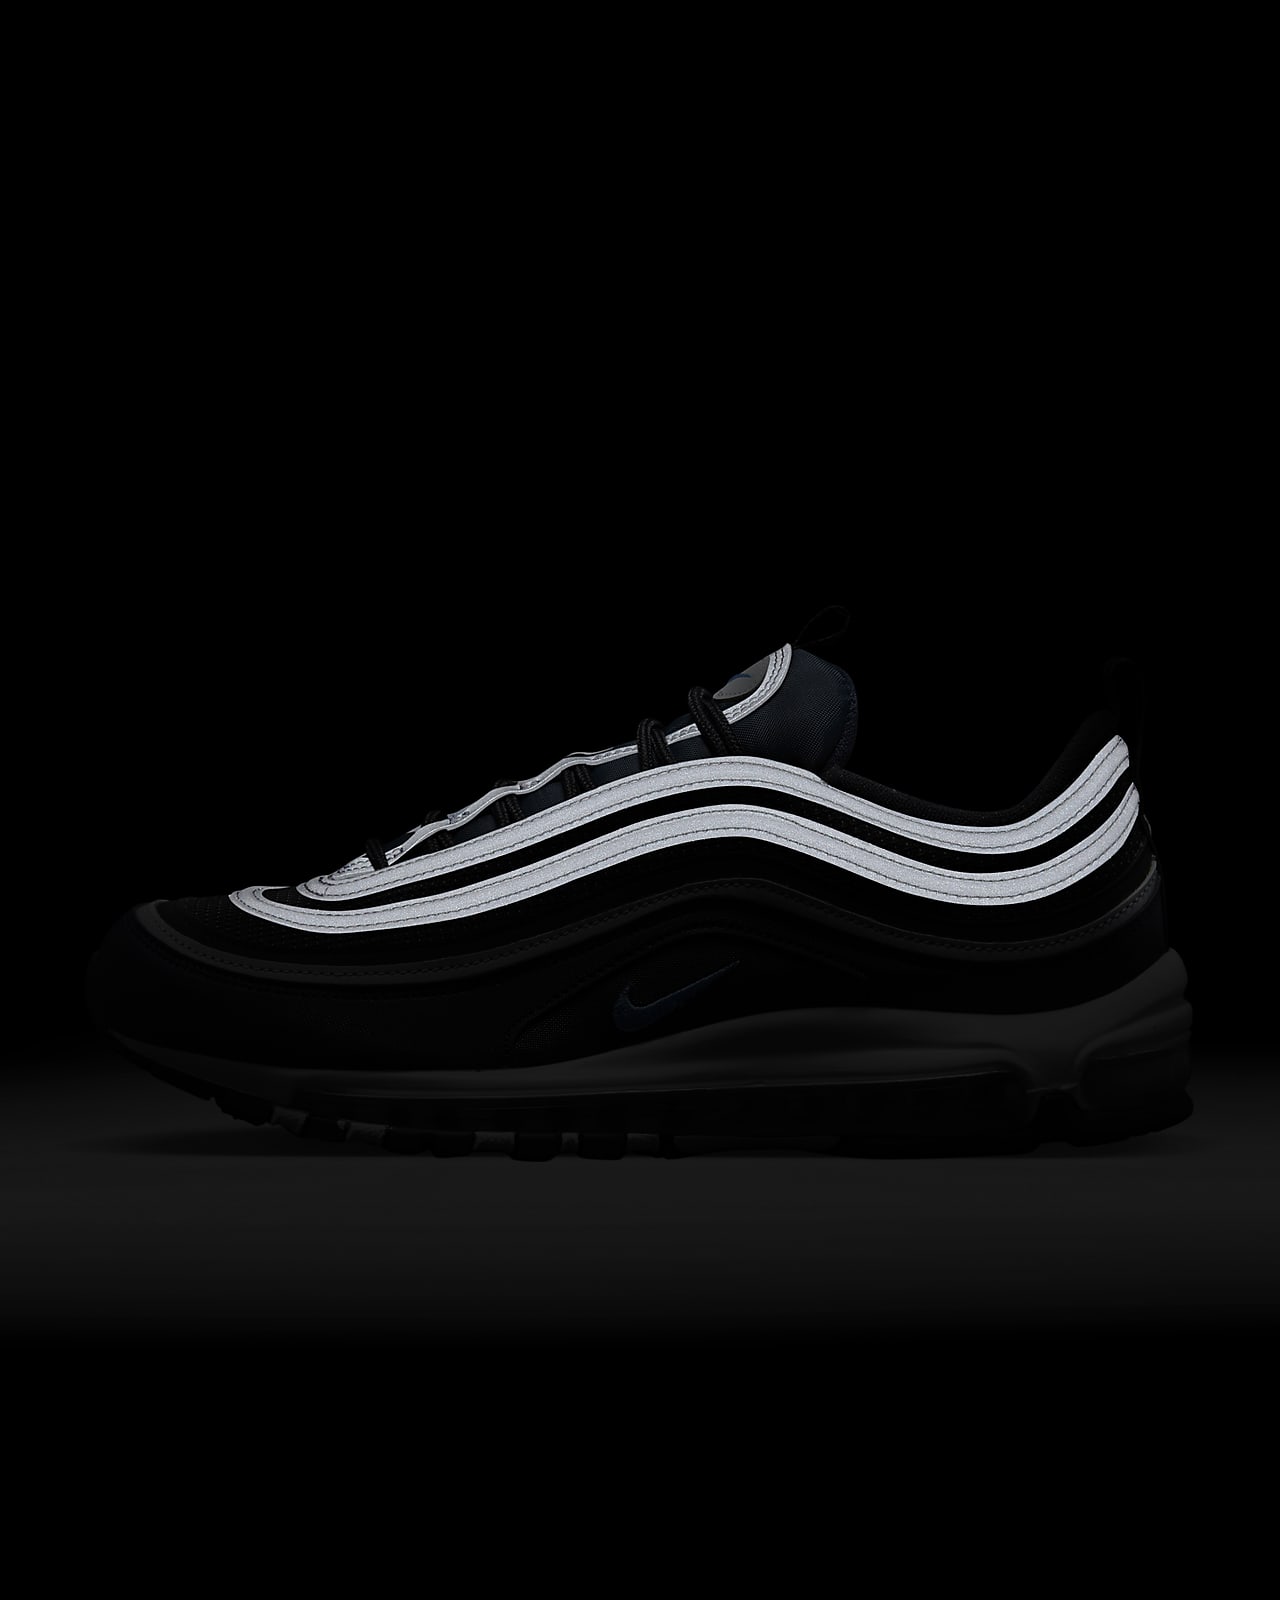 Already Special Person in charge of sports game Nike Air Max 97 Men's Shoes. Nike.com